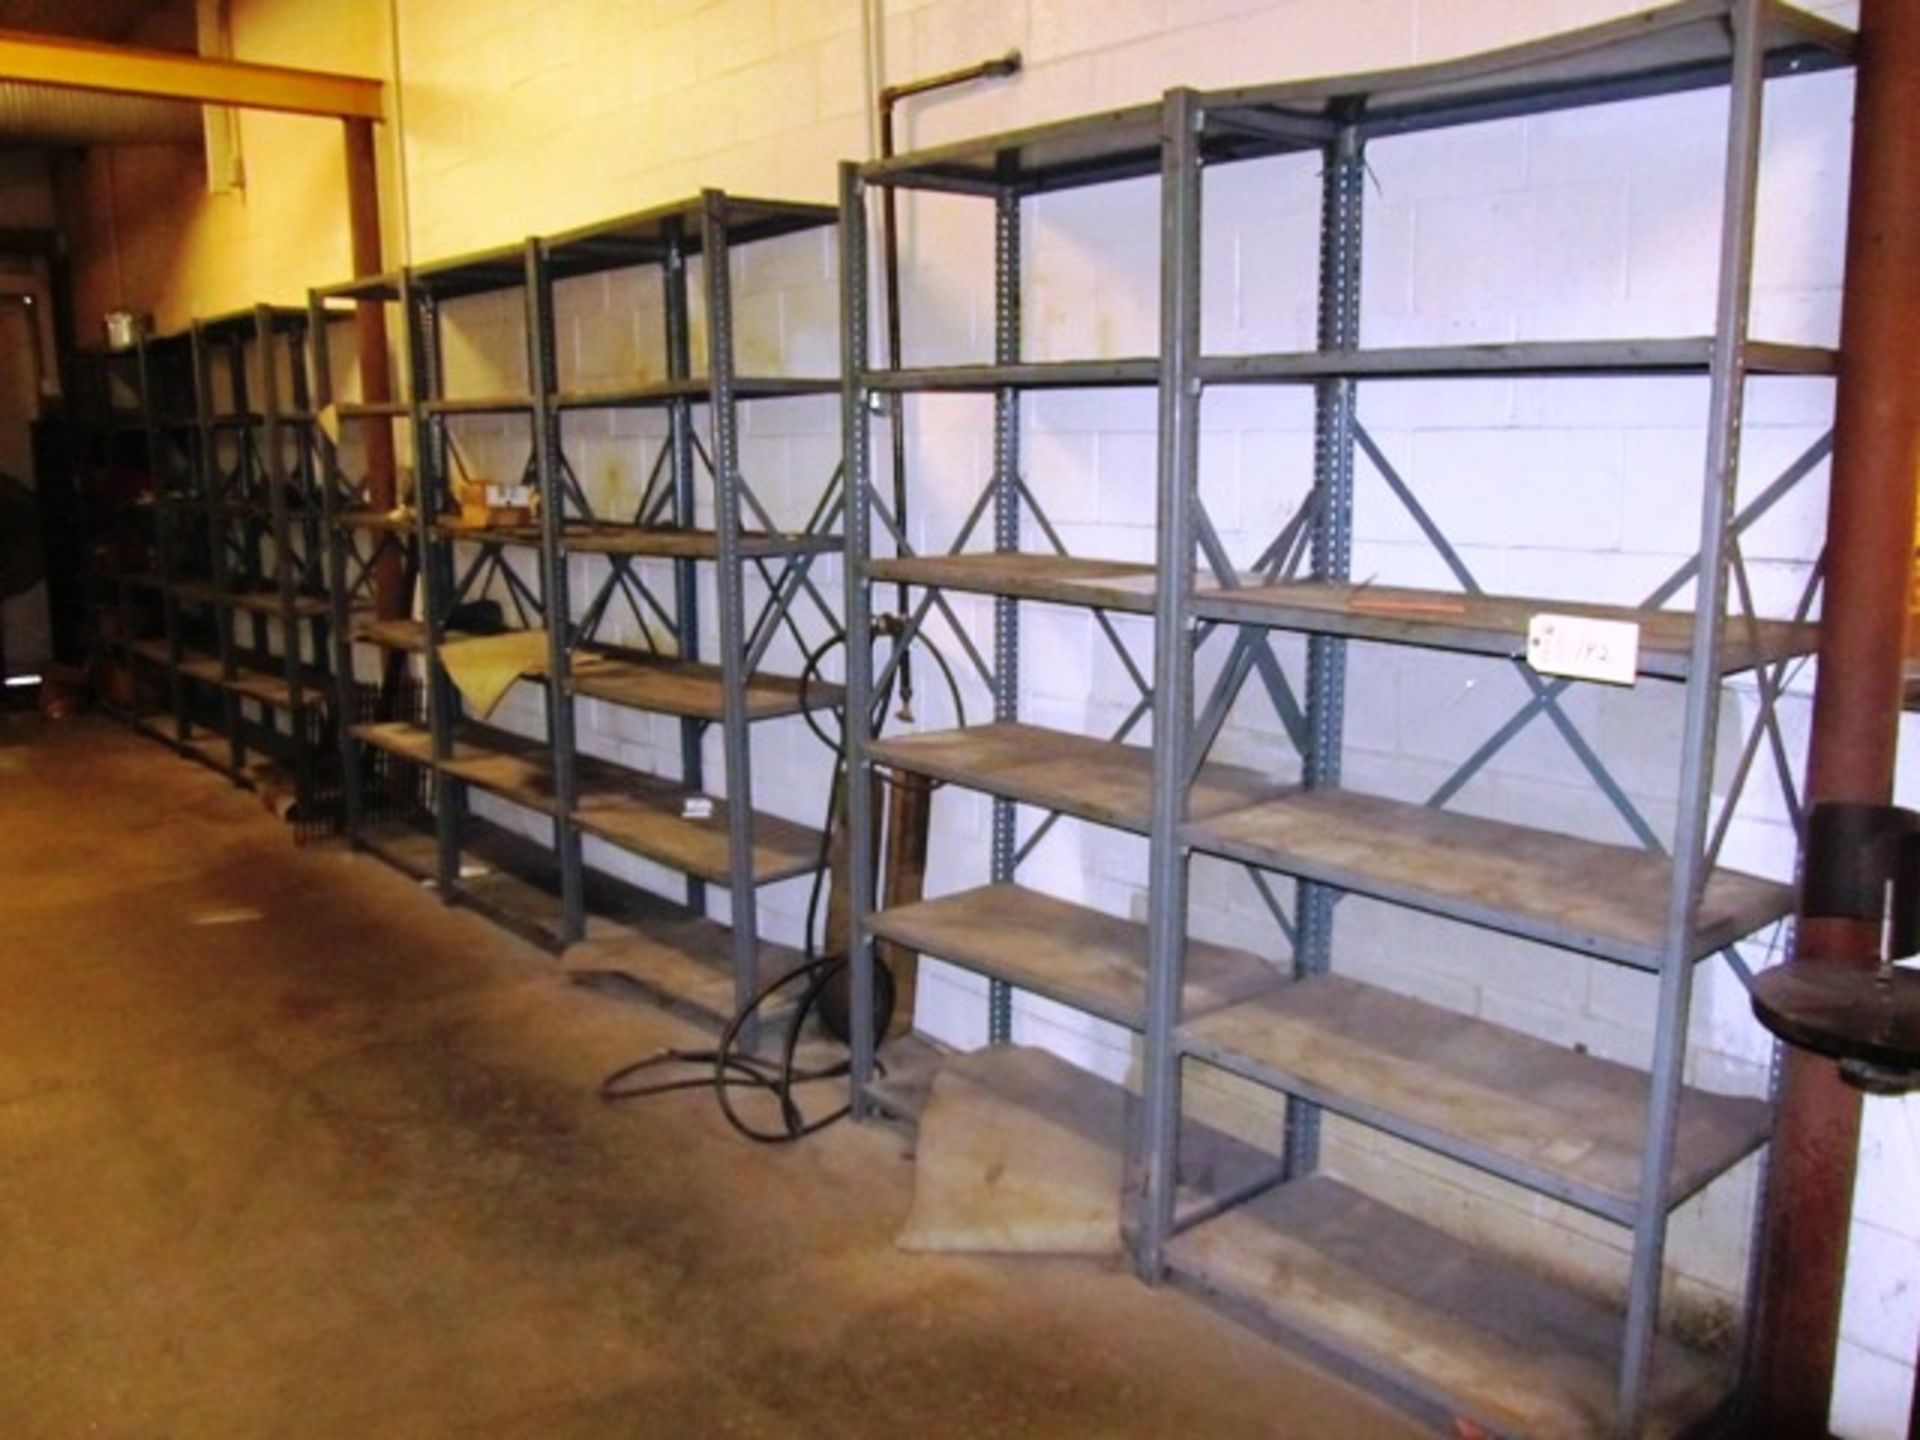 14 Sections of Shelving